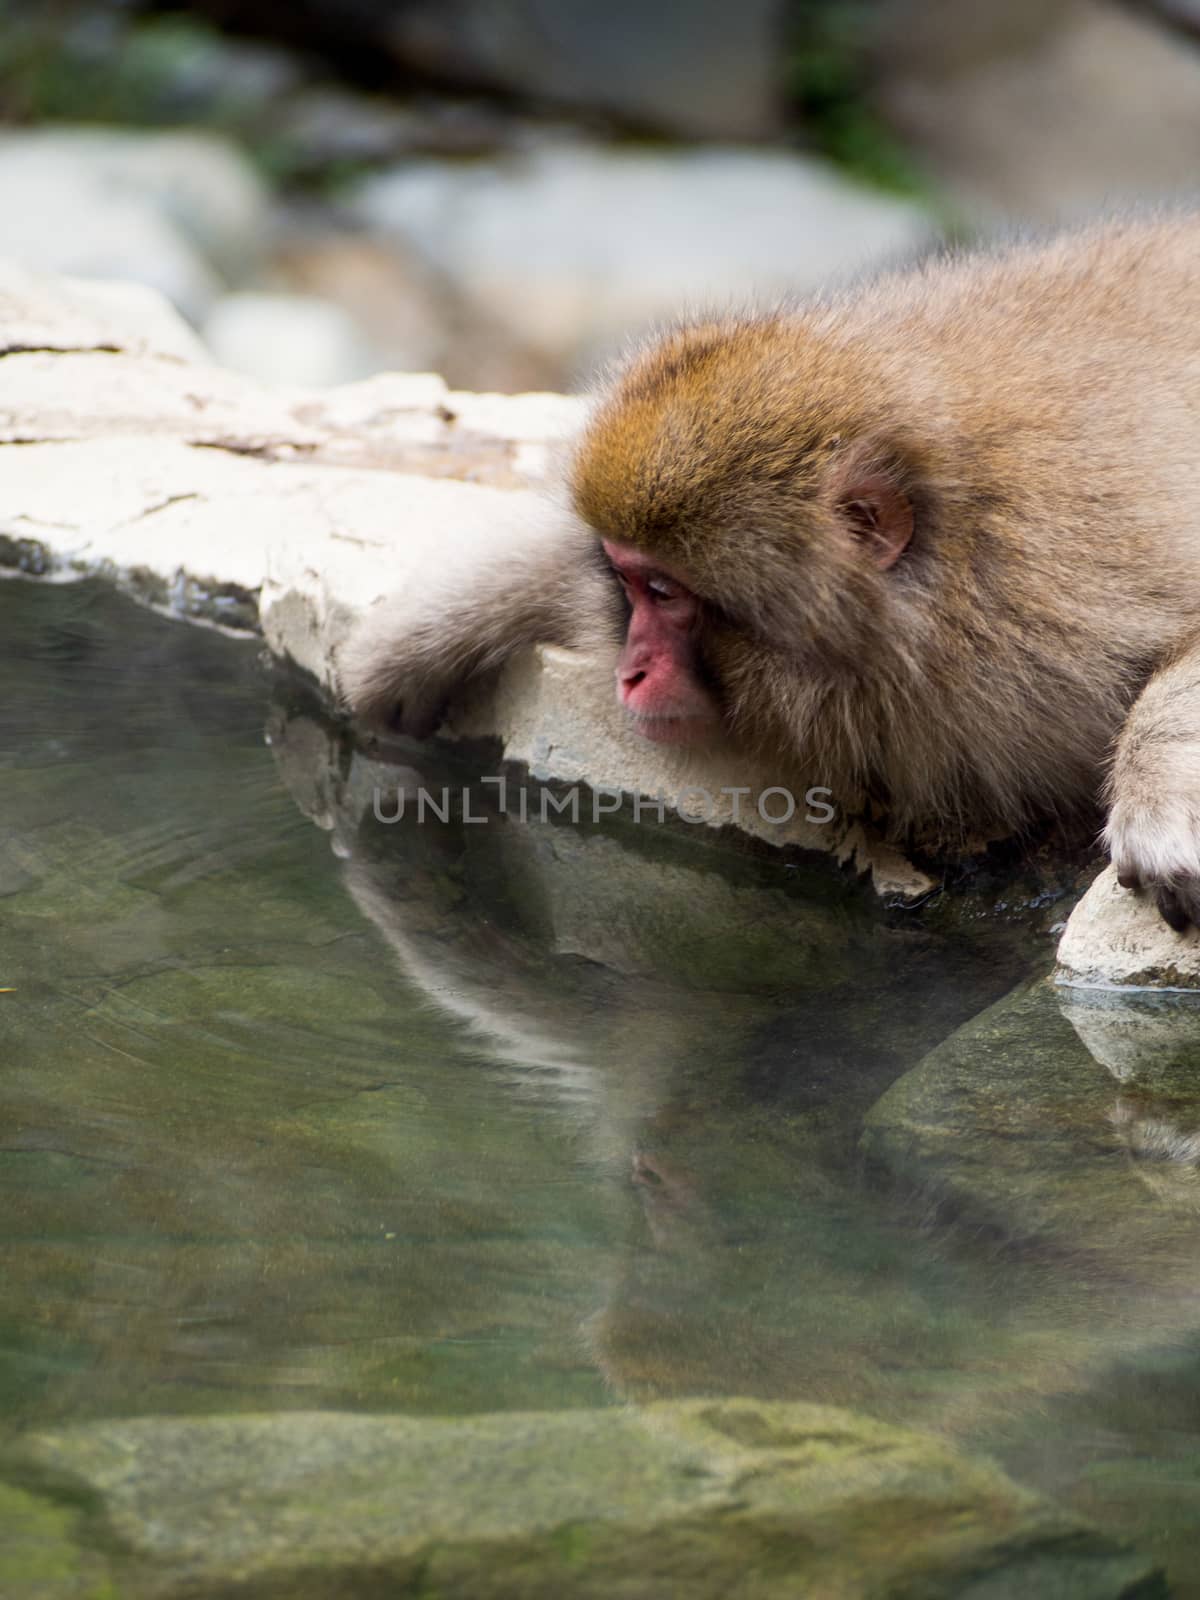 Japanese macaques, also known as snow monkeys, interacting with eachother in a natural setting. 